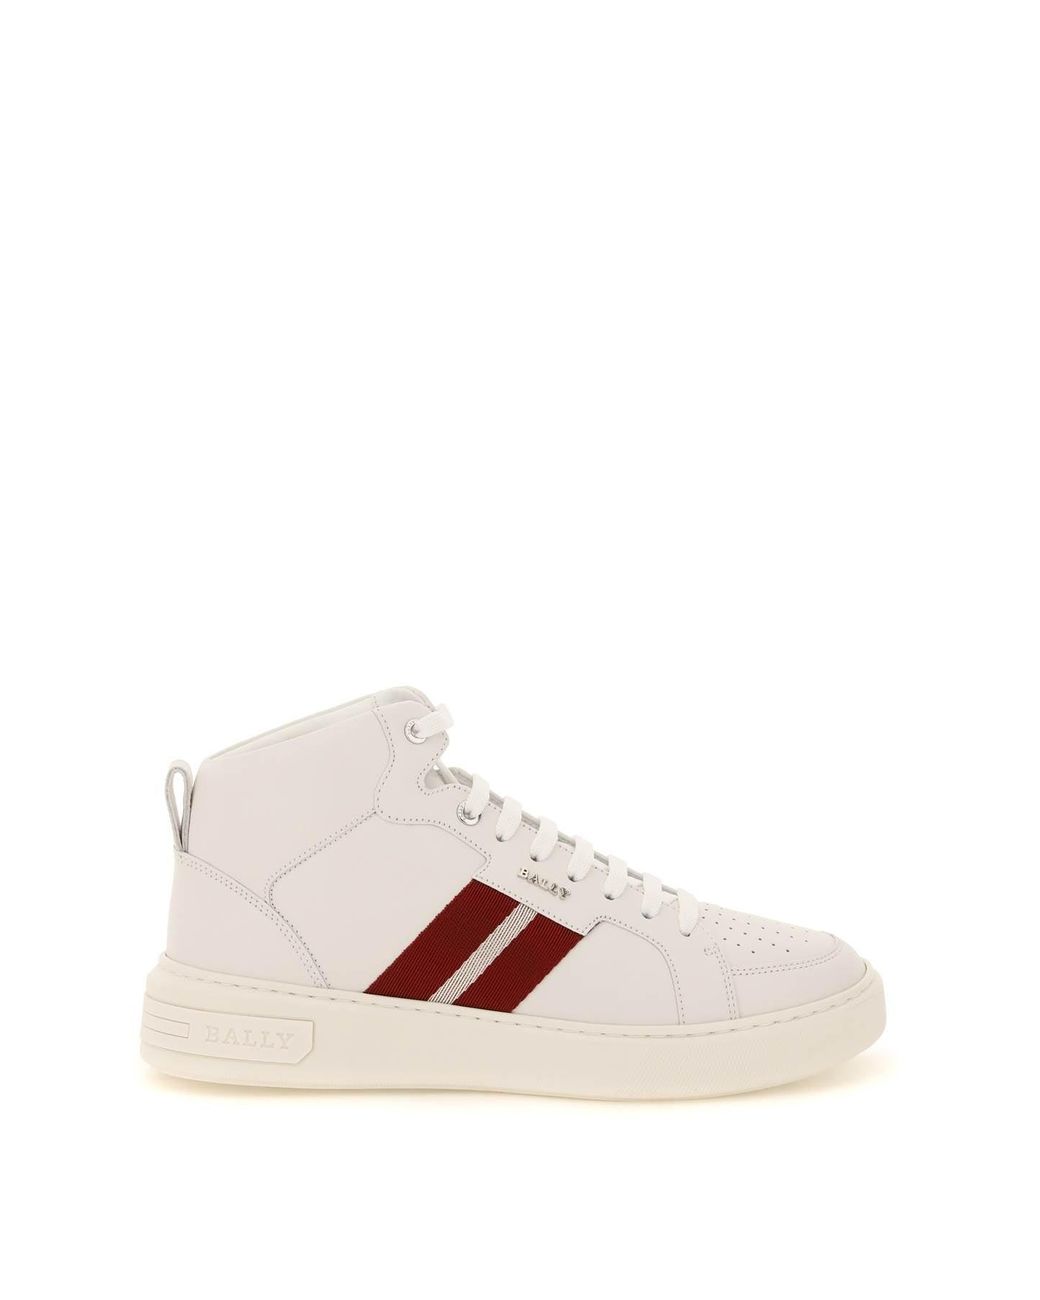 Bally Myles Leather High Sneakers for Men | Lyst